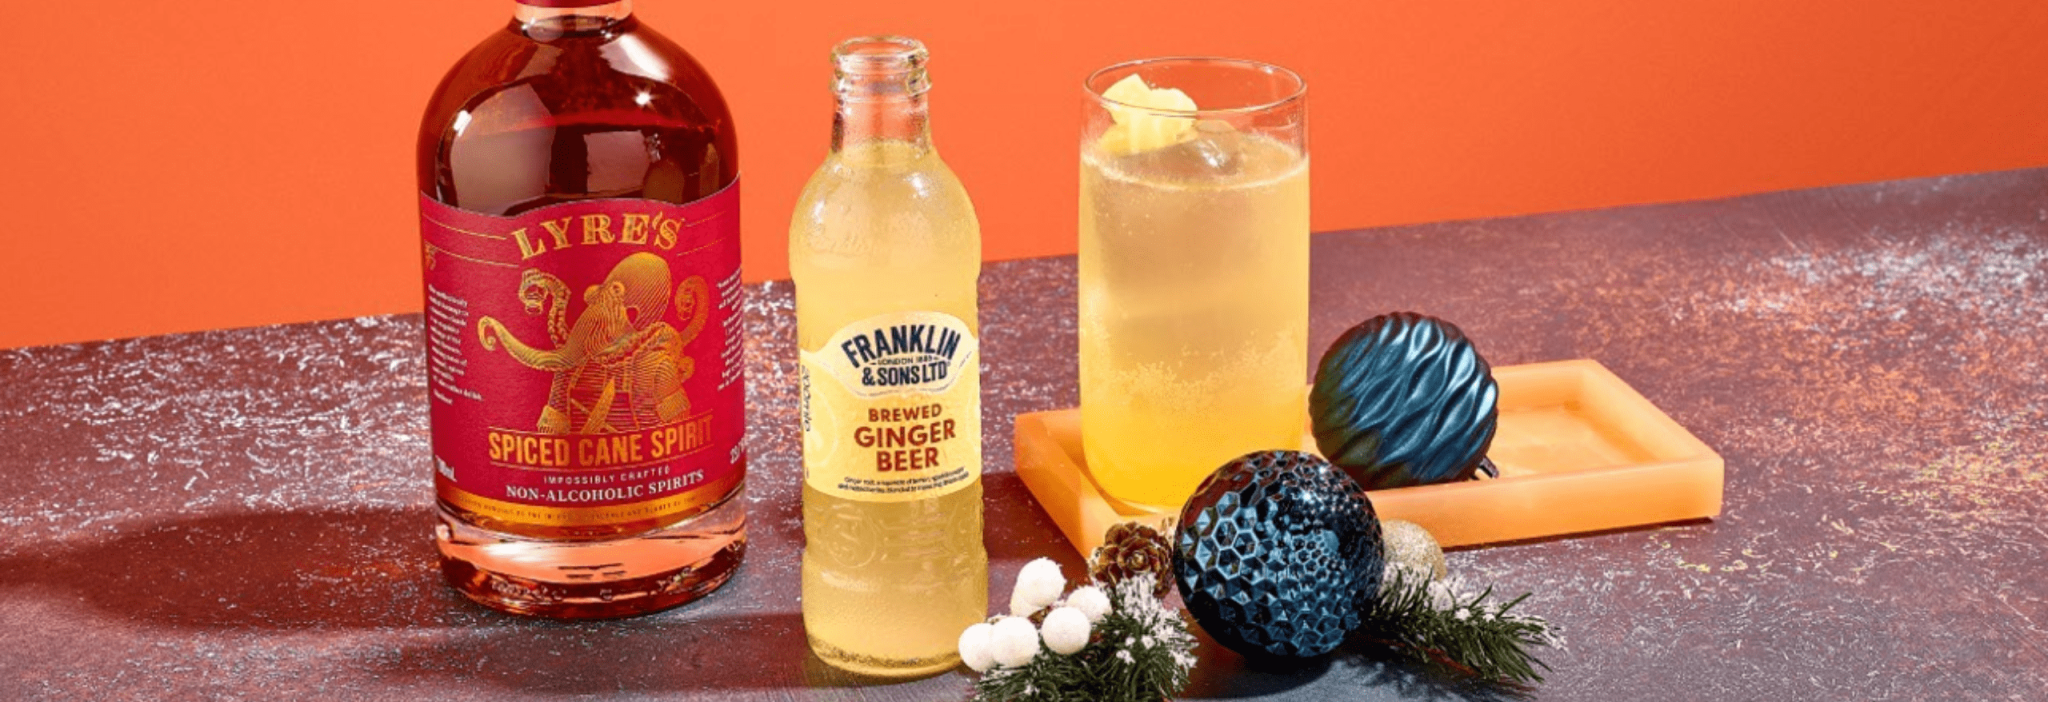 Franklin & Sons | No Serious-storm Christmas cocktail